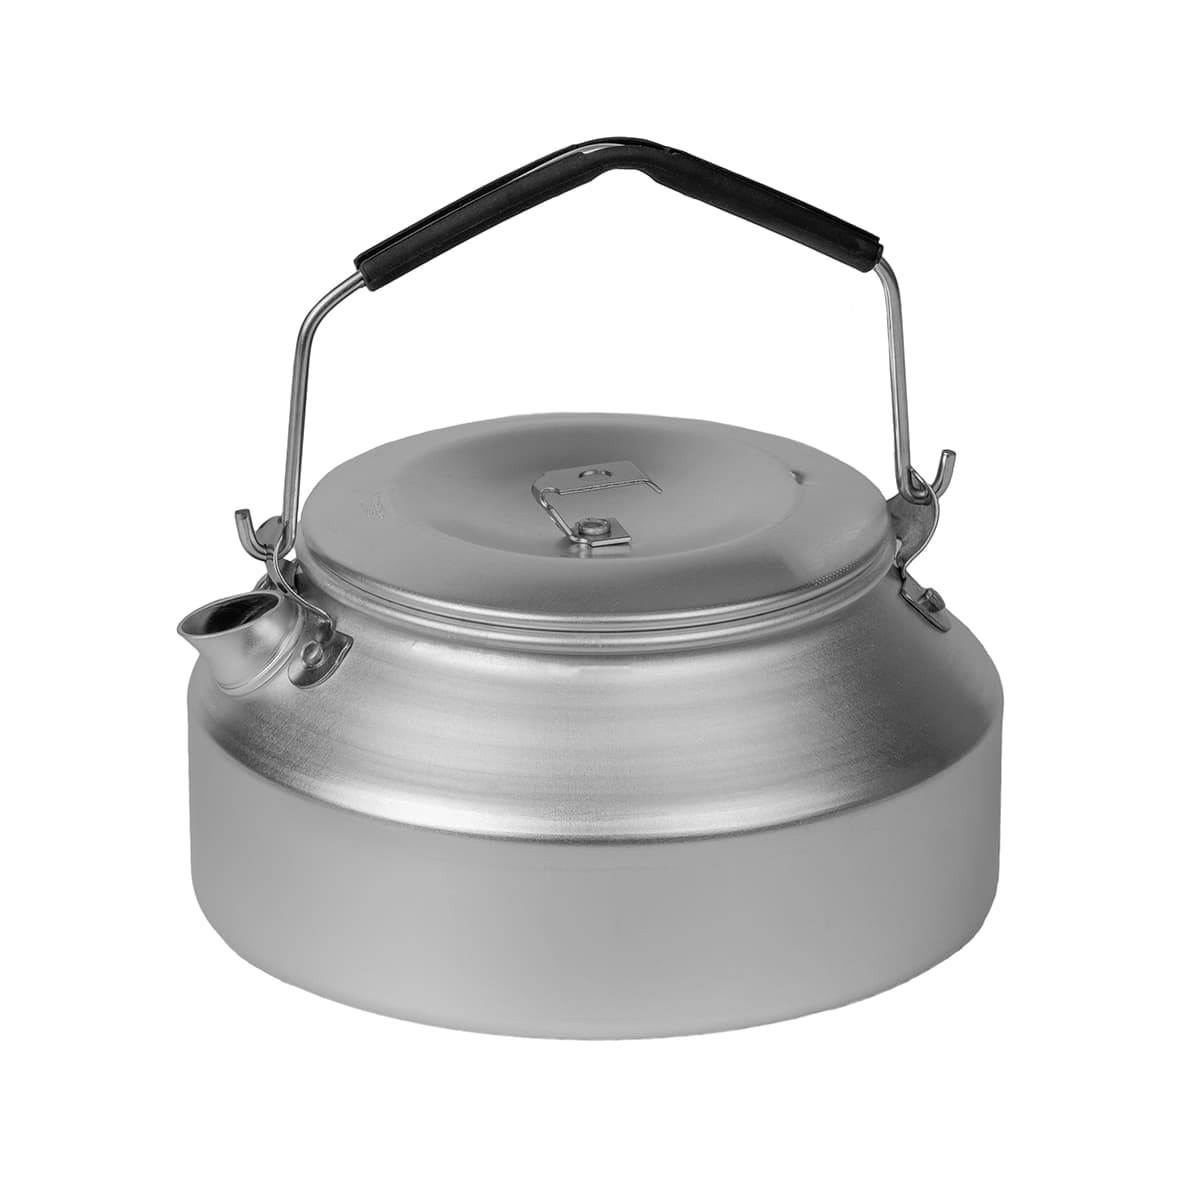 Trangia 0.9 L Aluminum Kettle with Stainless knob for 25 Series Cooksets 